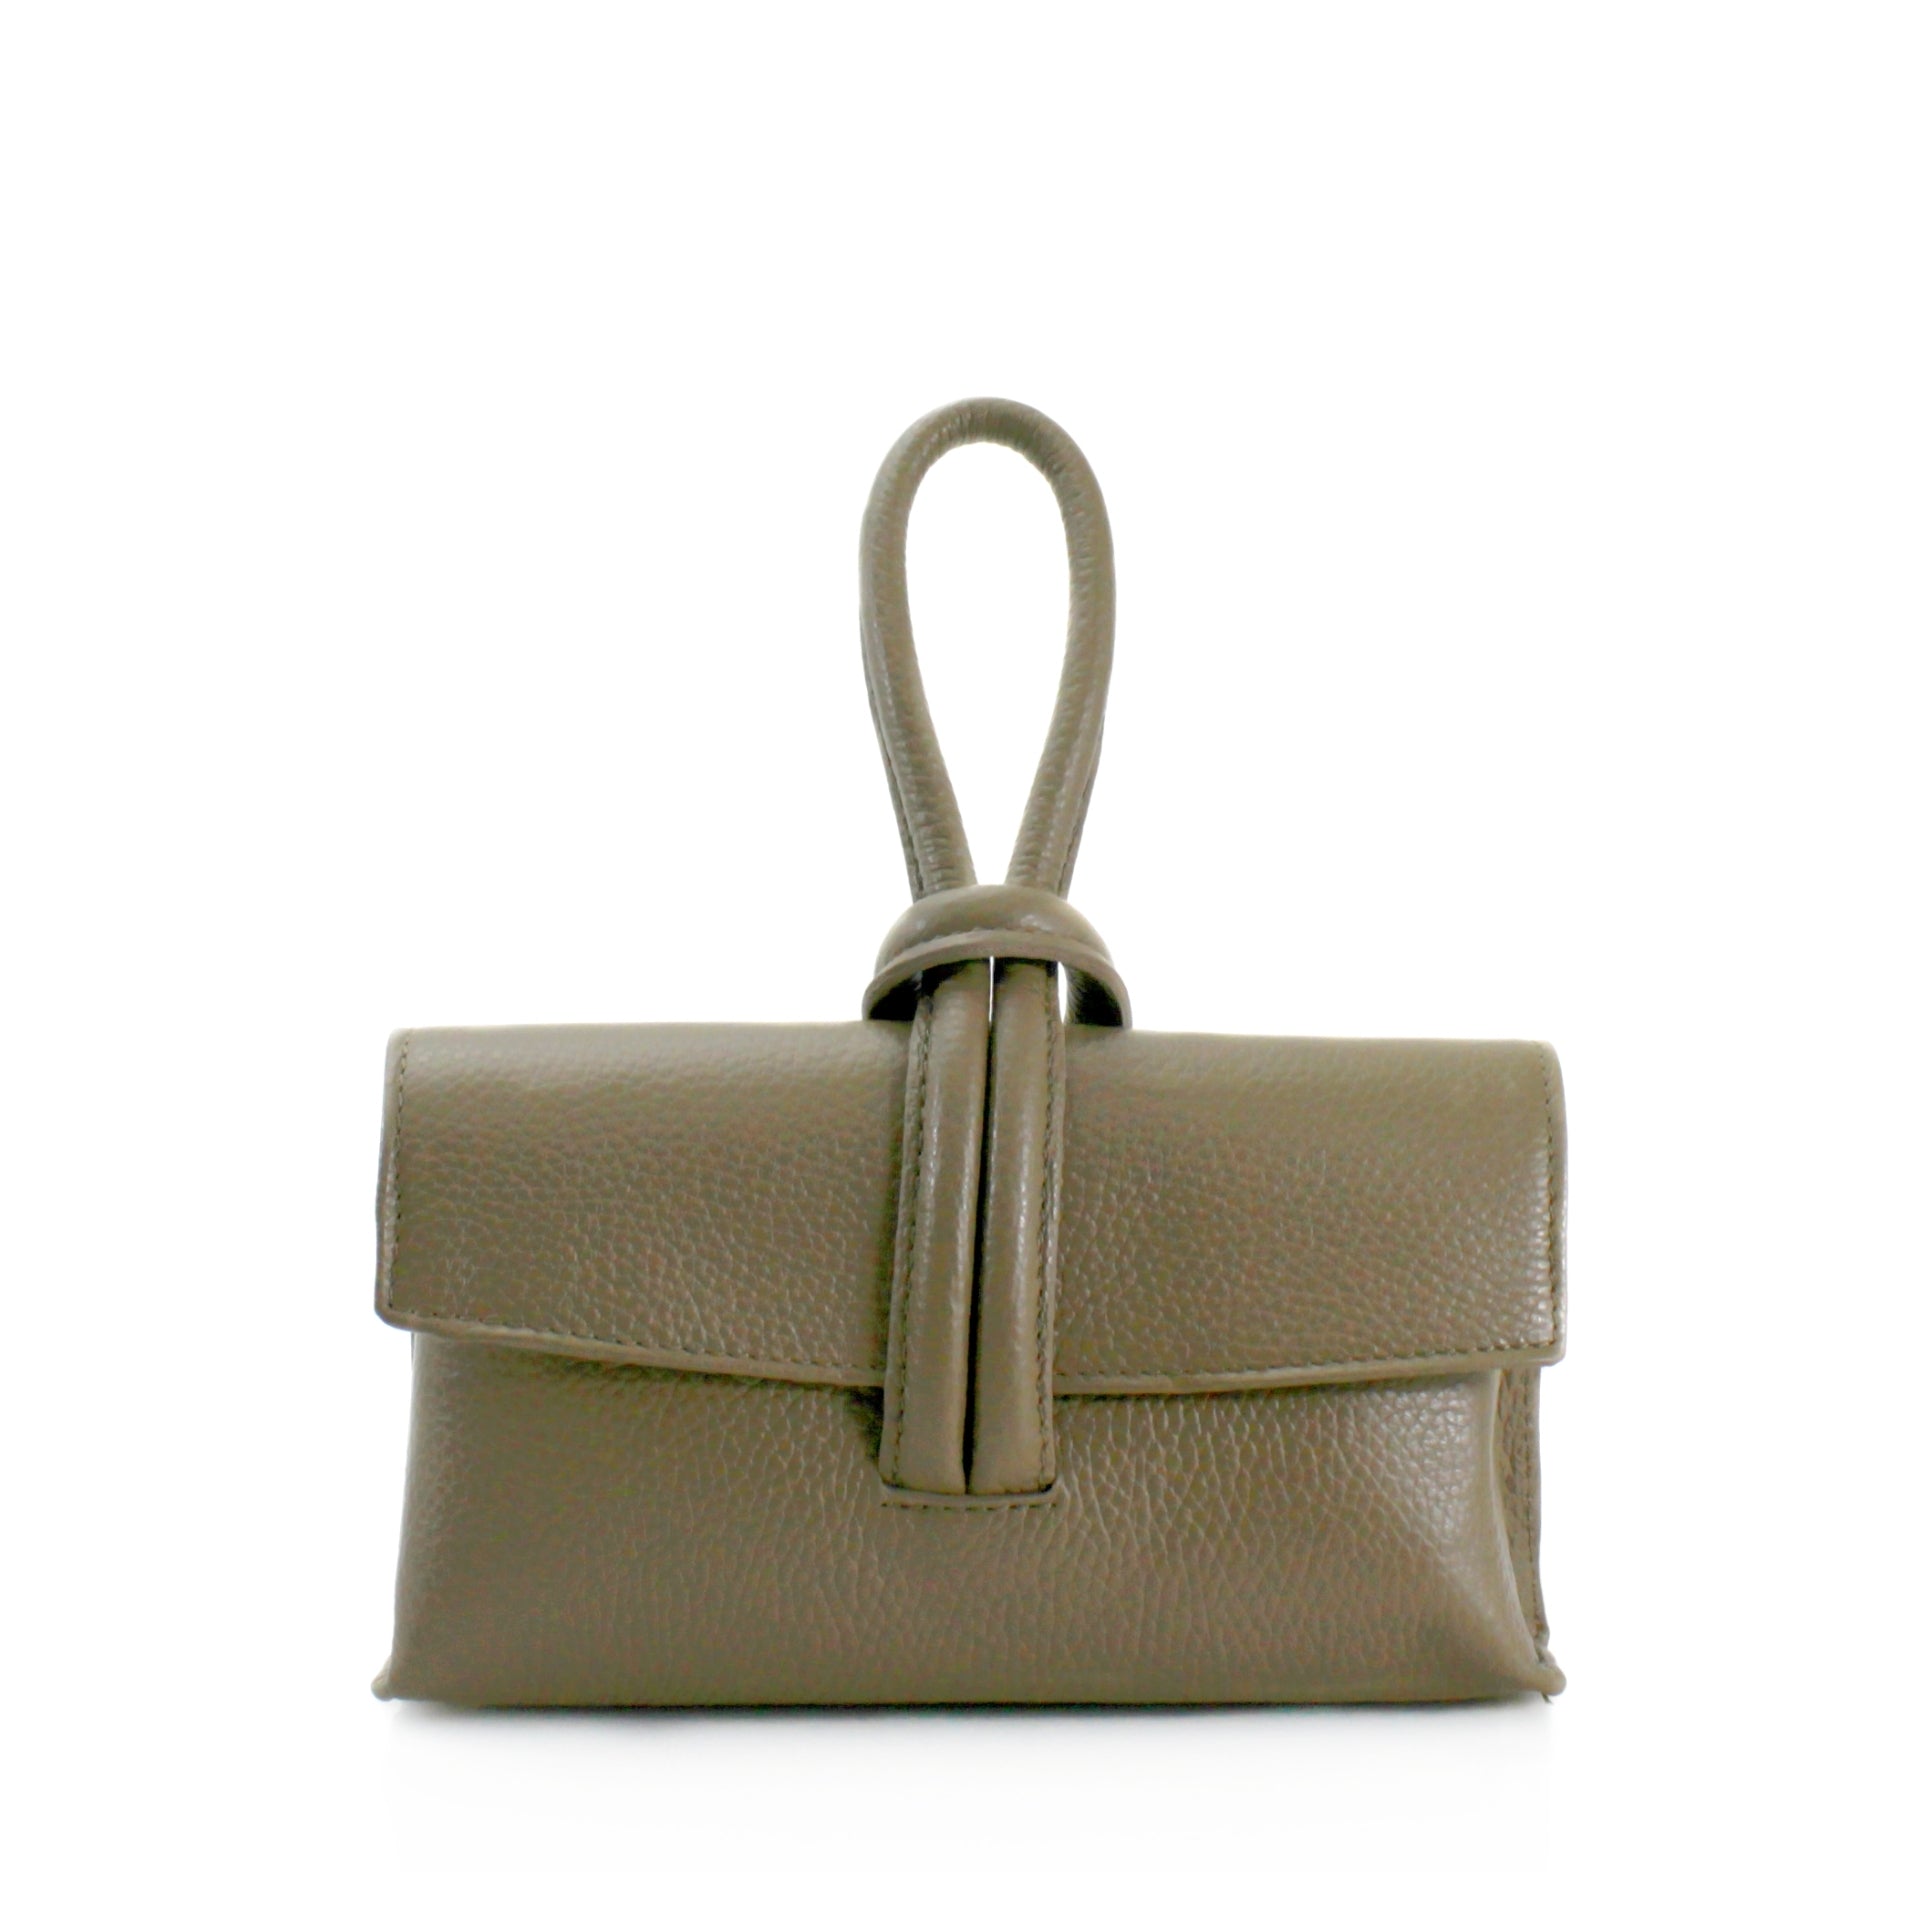 Chic & Sassy Taupe Leather Clutch Bag